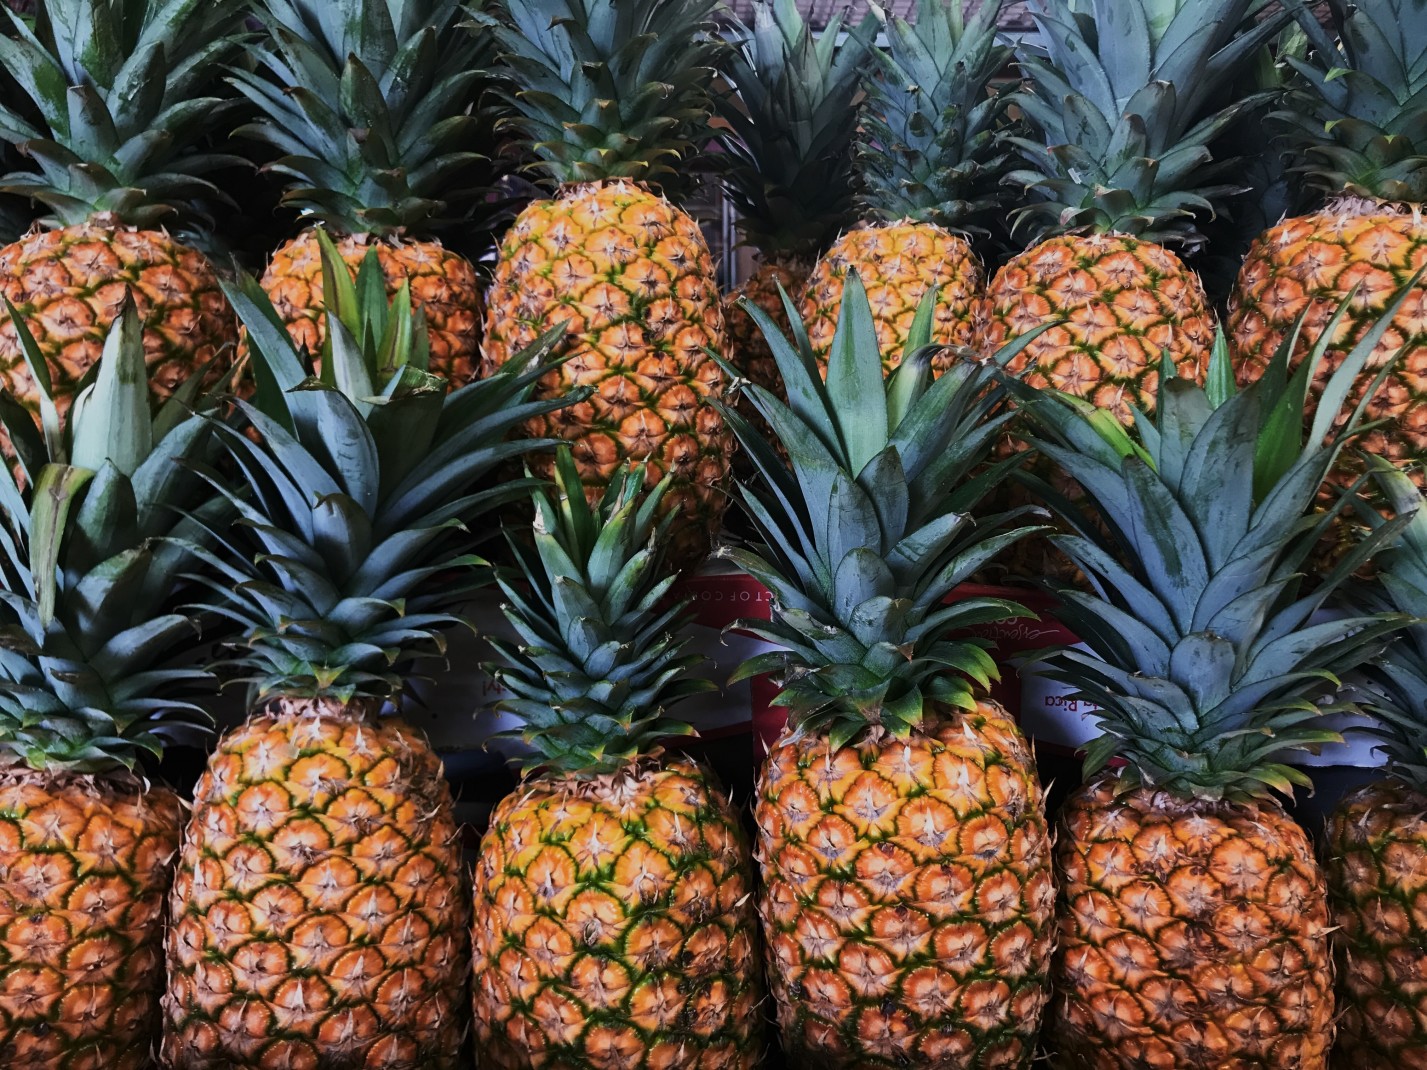 two rows of yellow pineapples with green leafy stems